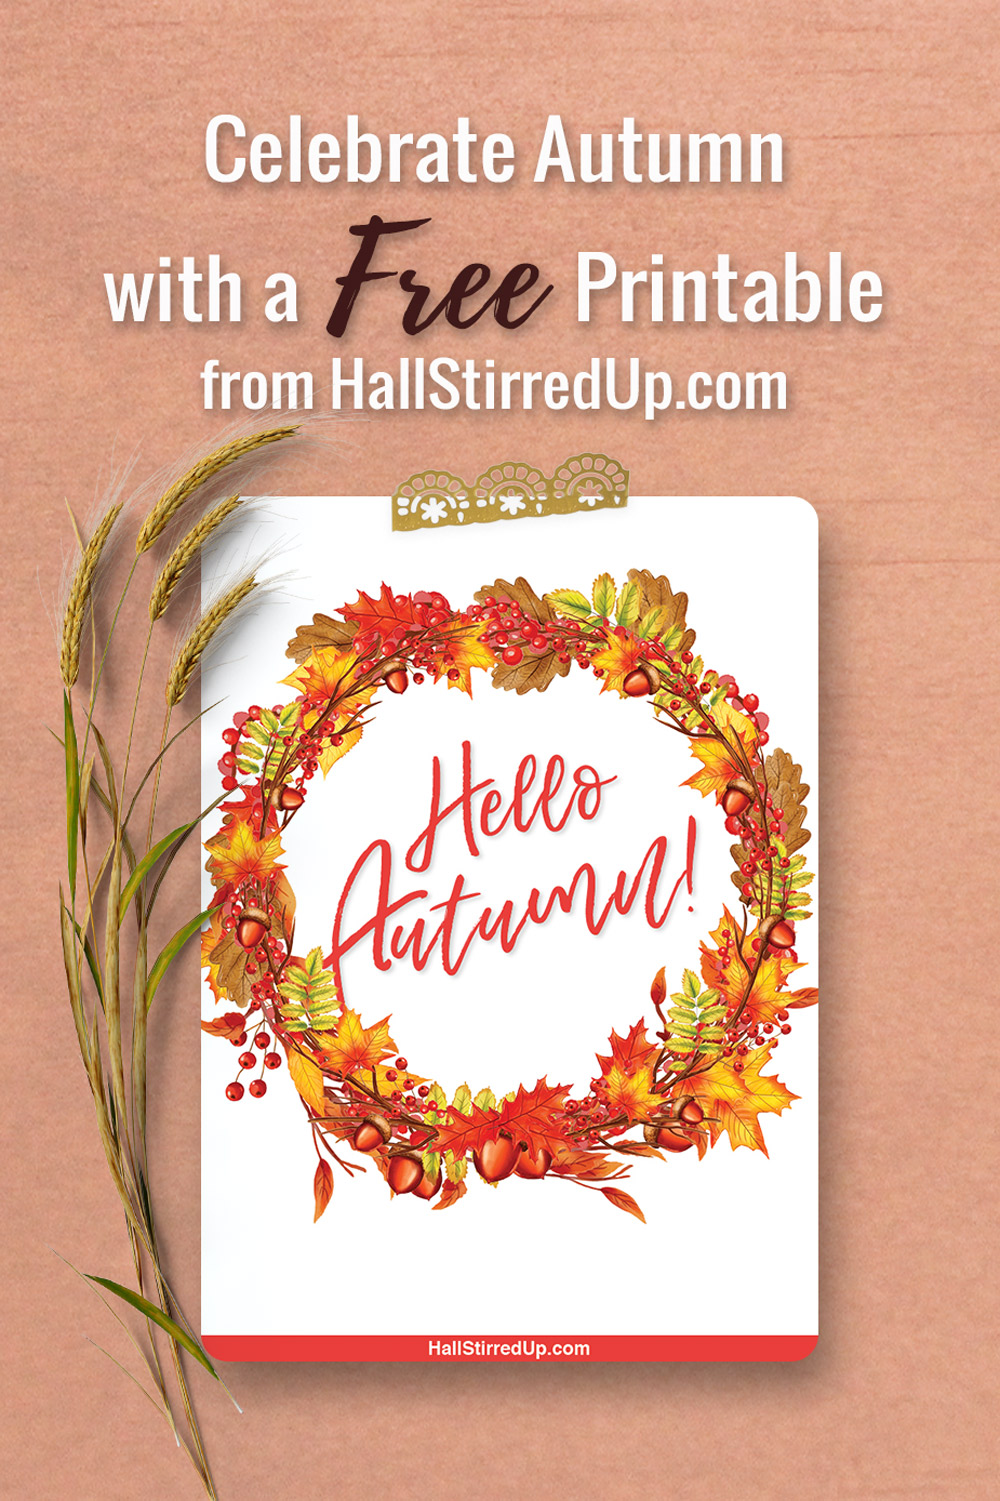 Top 10 best things about Autumn includes a free printable